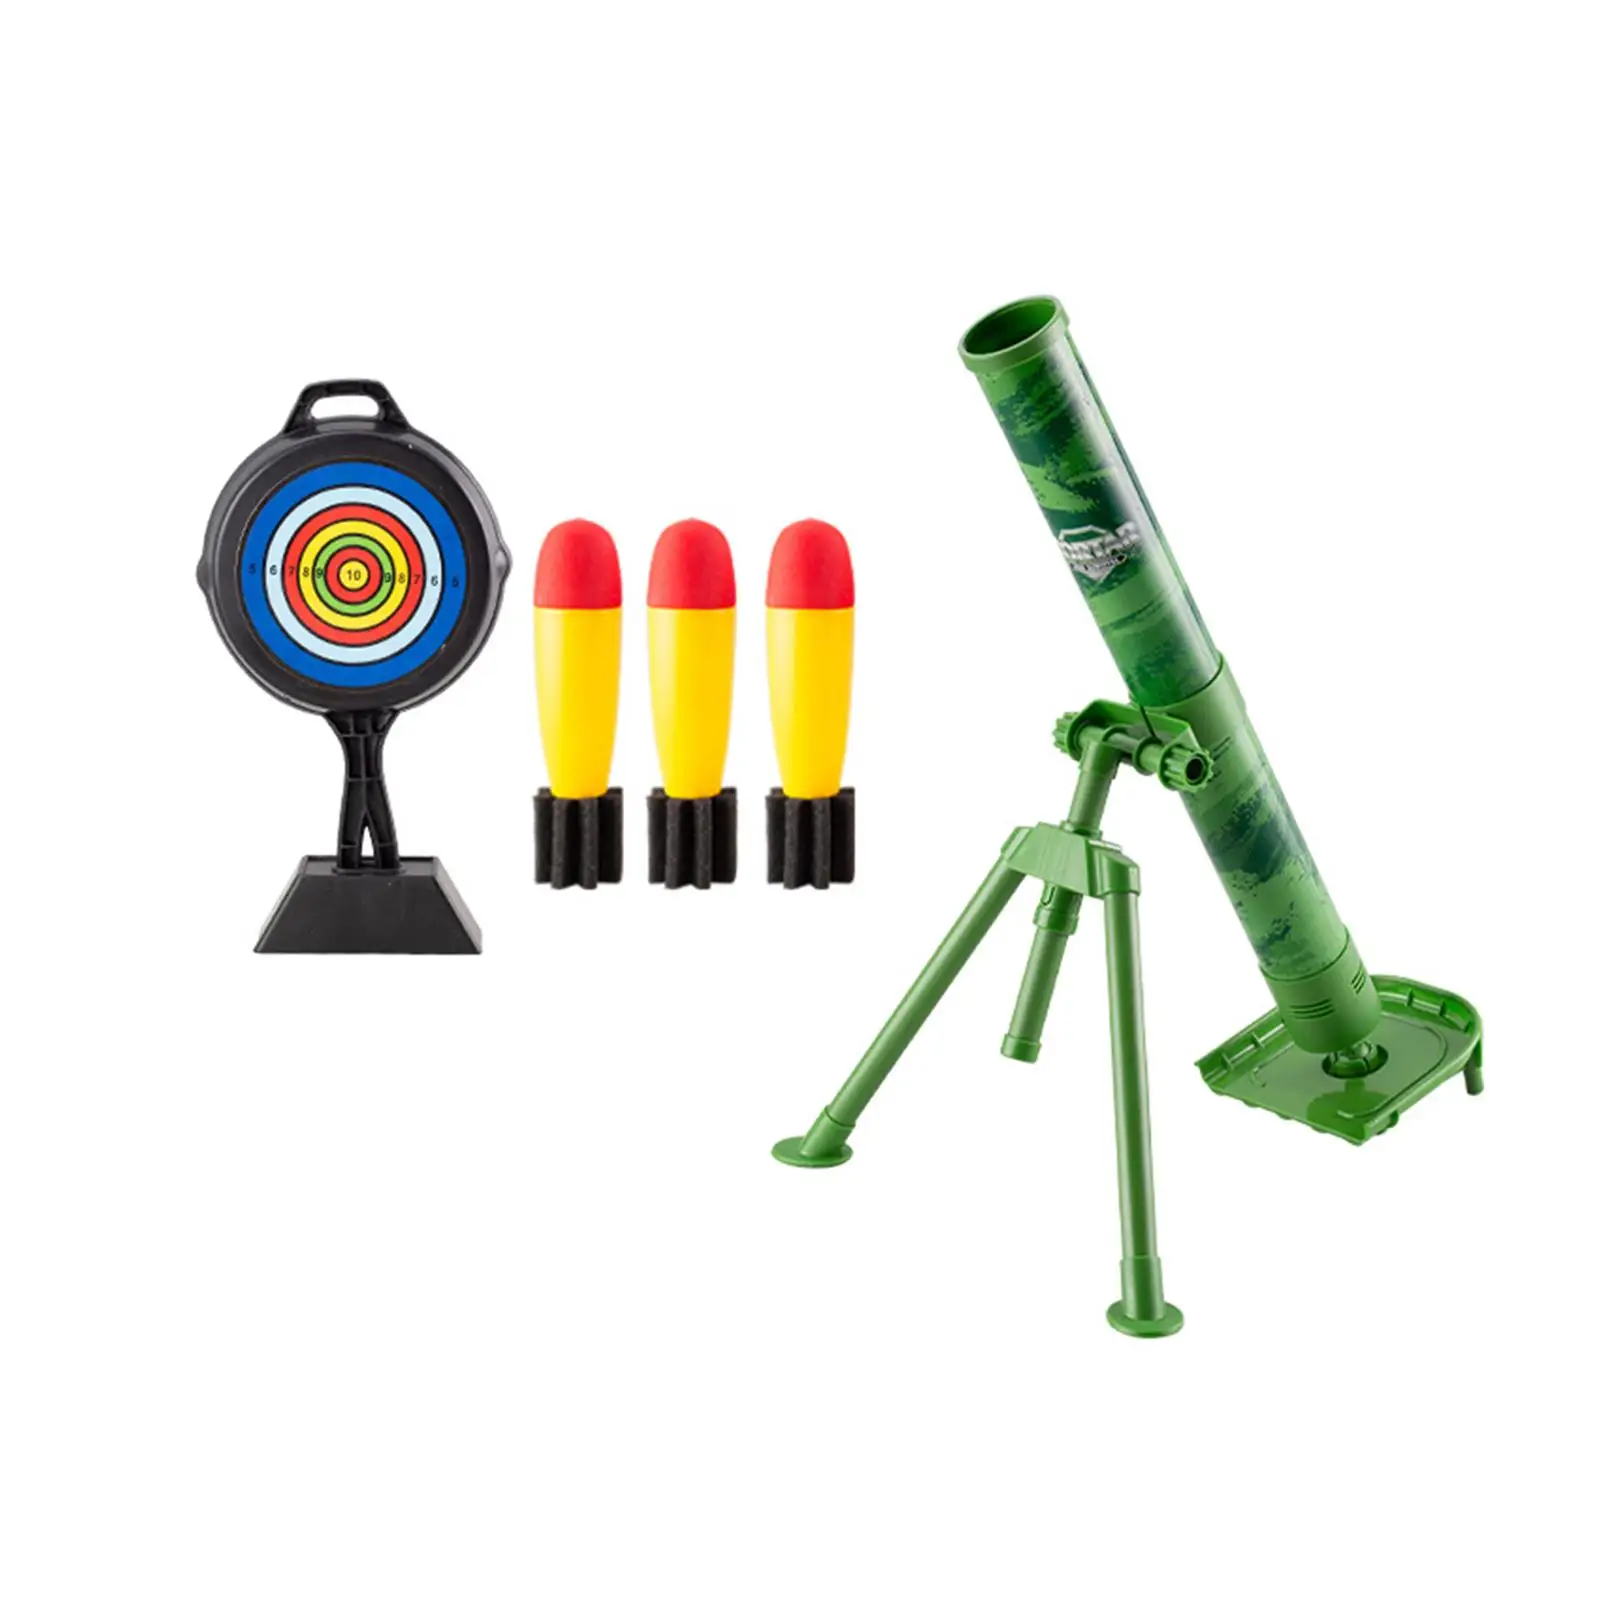 Mortar Launcher Toys Rocket Launcher Set for Boys and Girls Birthday Present